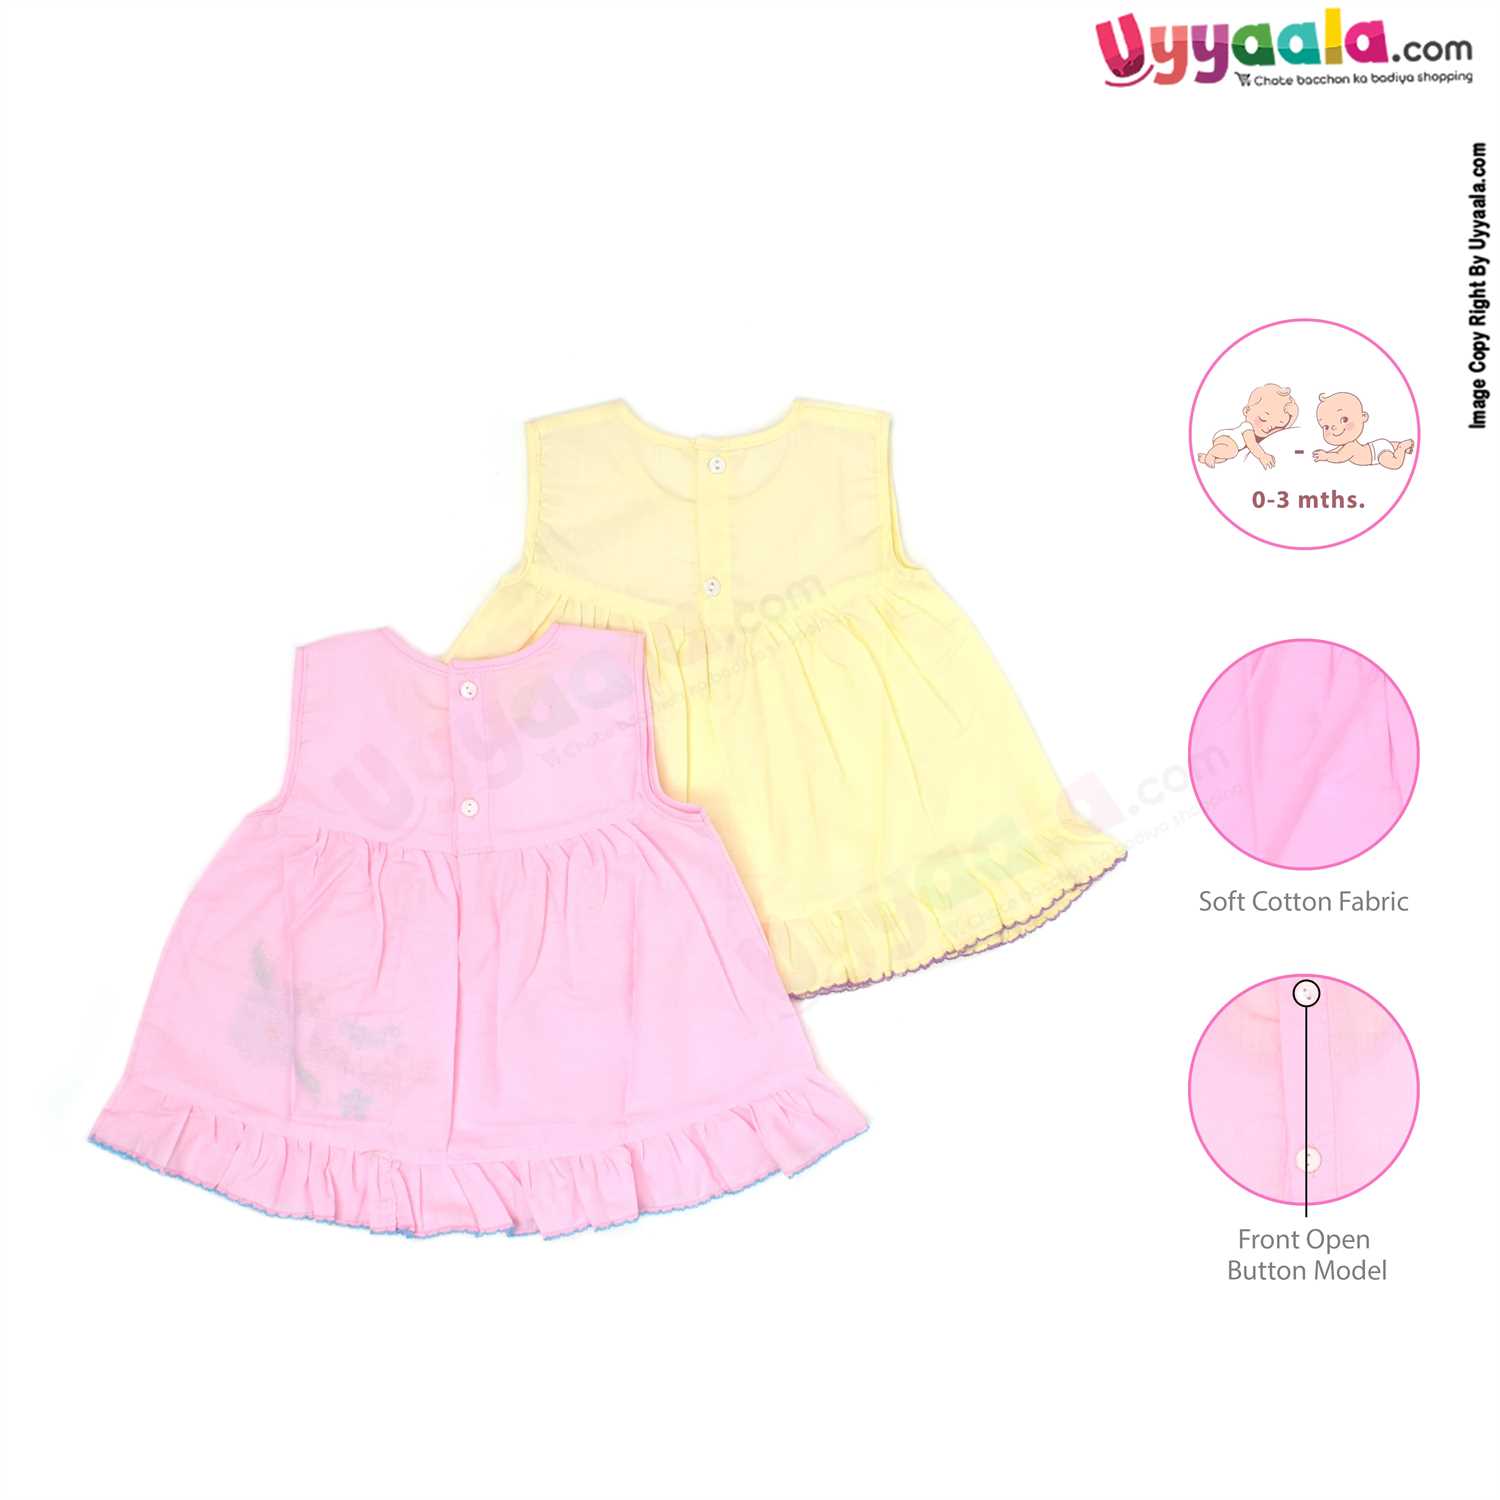 KBZONE Baby Girl's Empire Knee Length Dress (1-2 Years) Pink : Amazon.in:  Clothing & Accessories